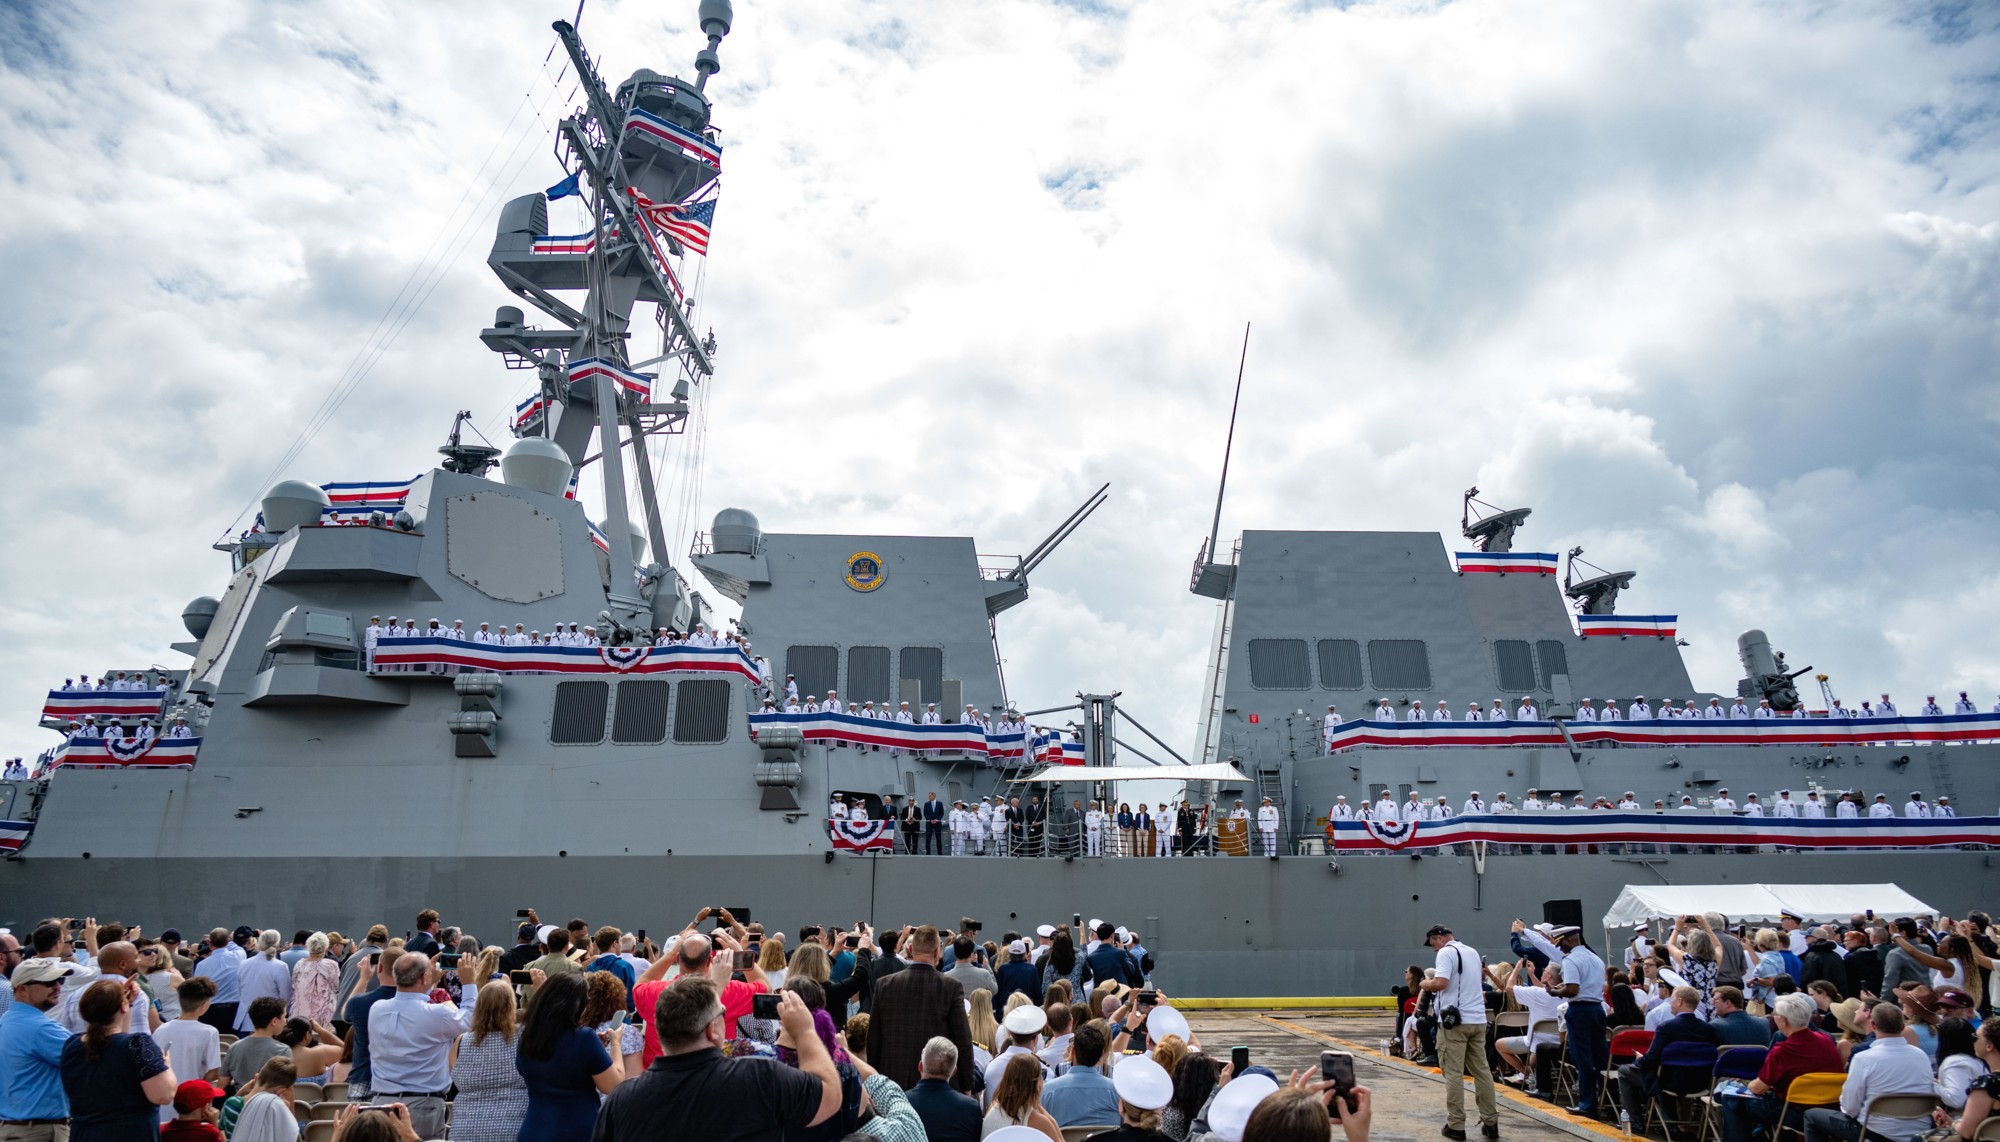 ddg-120 uss carl m. levin arleigh burke class guided missile destroyer aegis us navy commissioning baltimore maryland 38